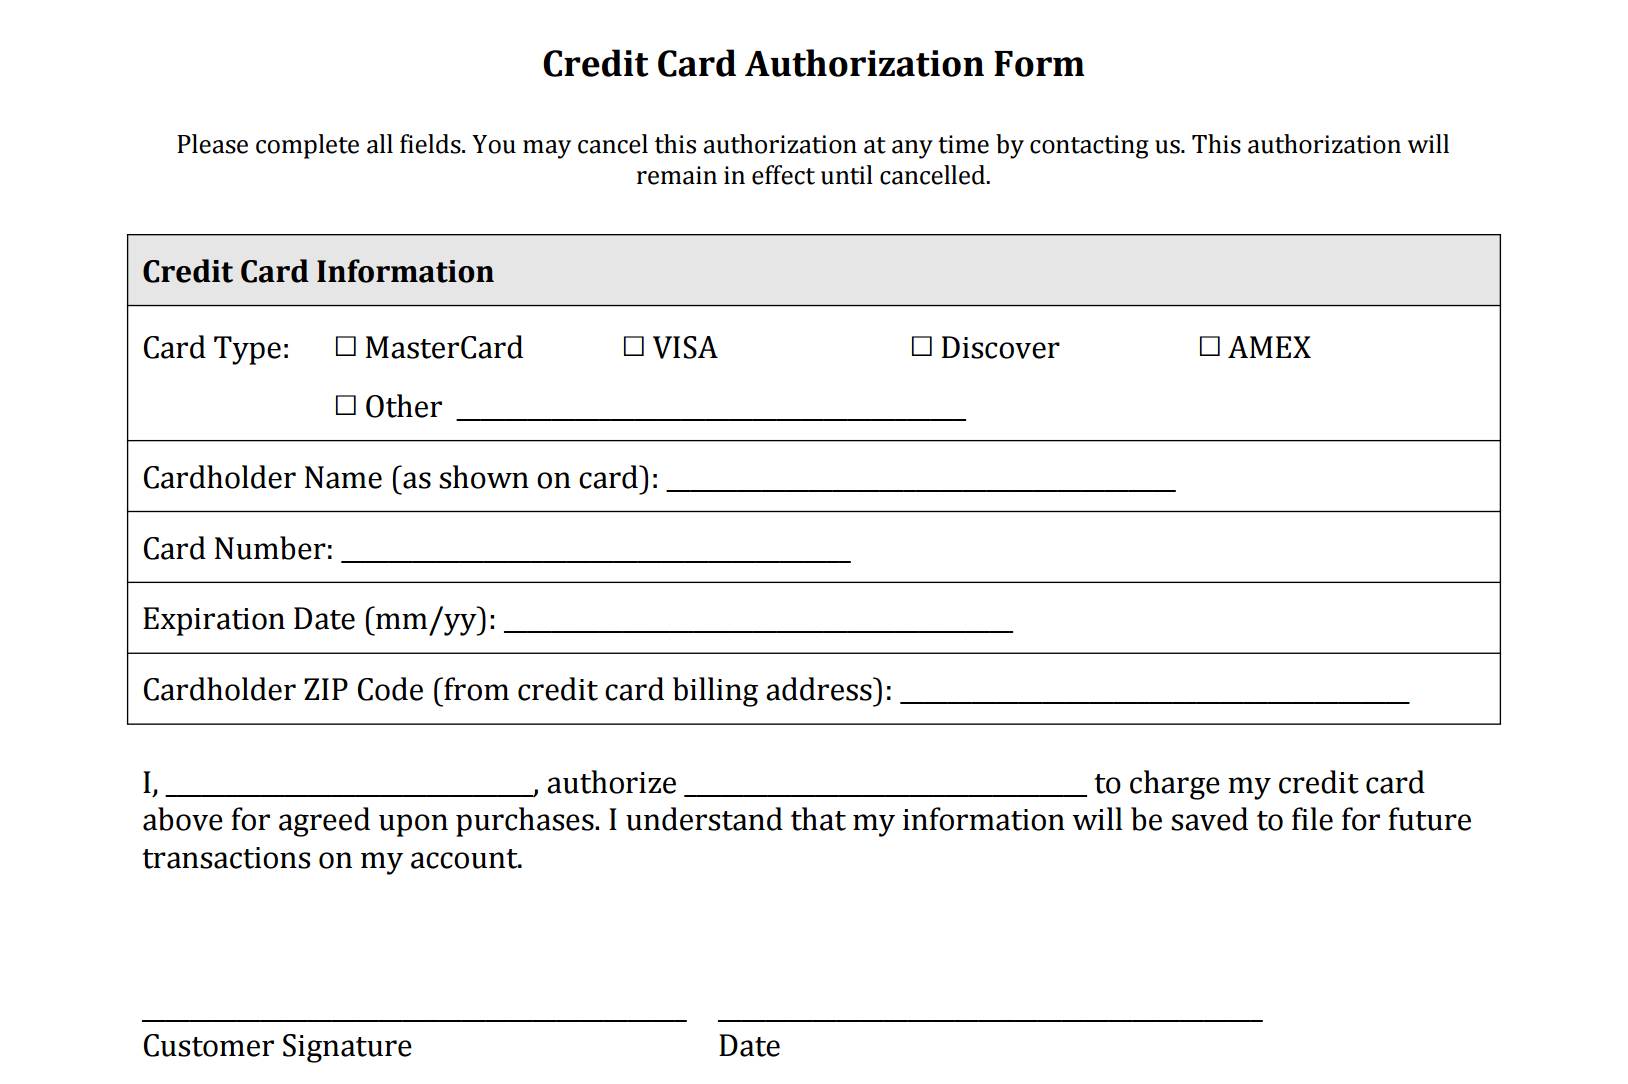 Credit Card Authorization Form Template Word - Sample Design Templates